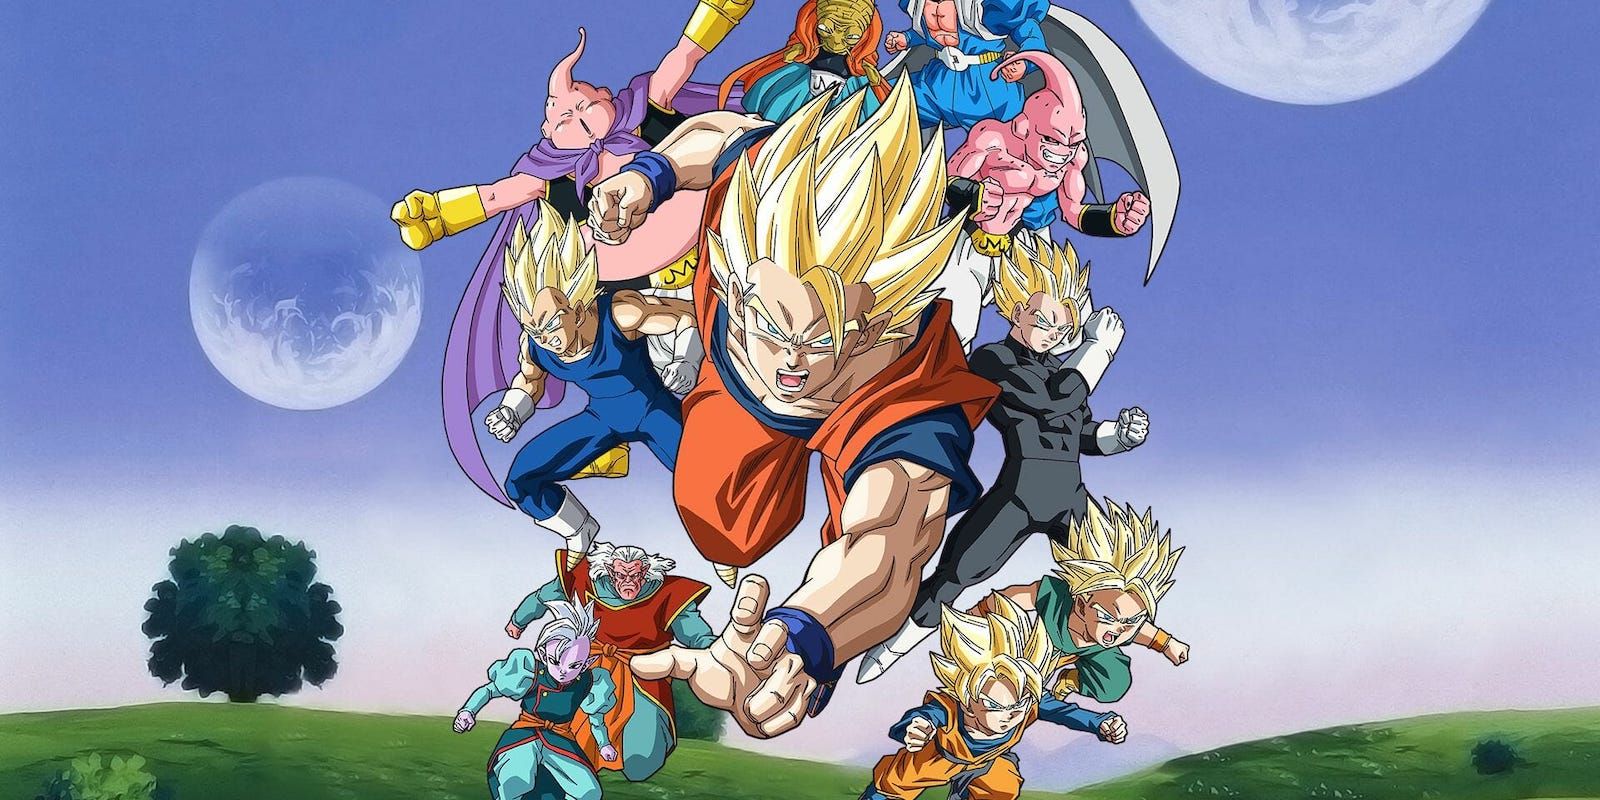 Dragon Ball Z Kai key visual of Goku in Super Saiyan mode surrounded by a variety of supporting cast members.